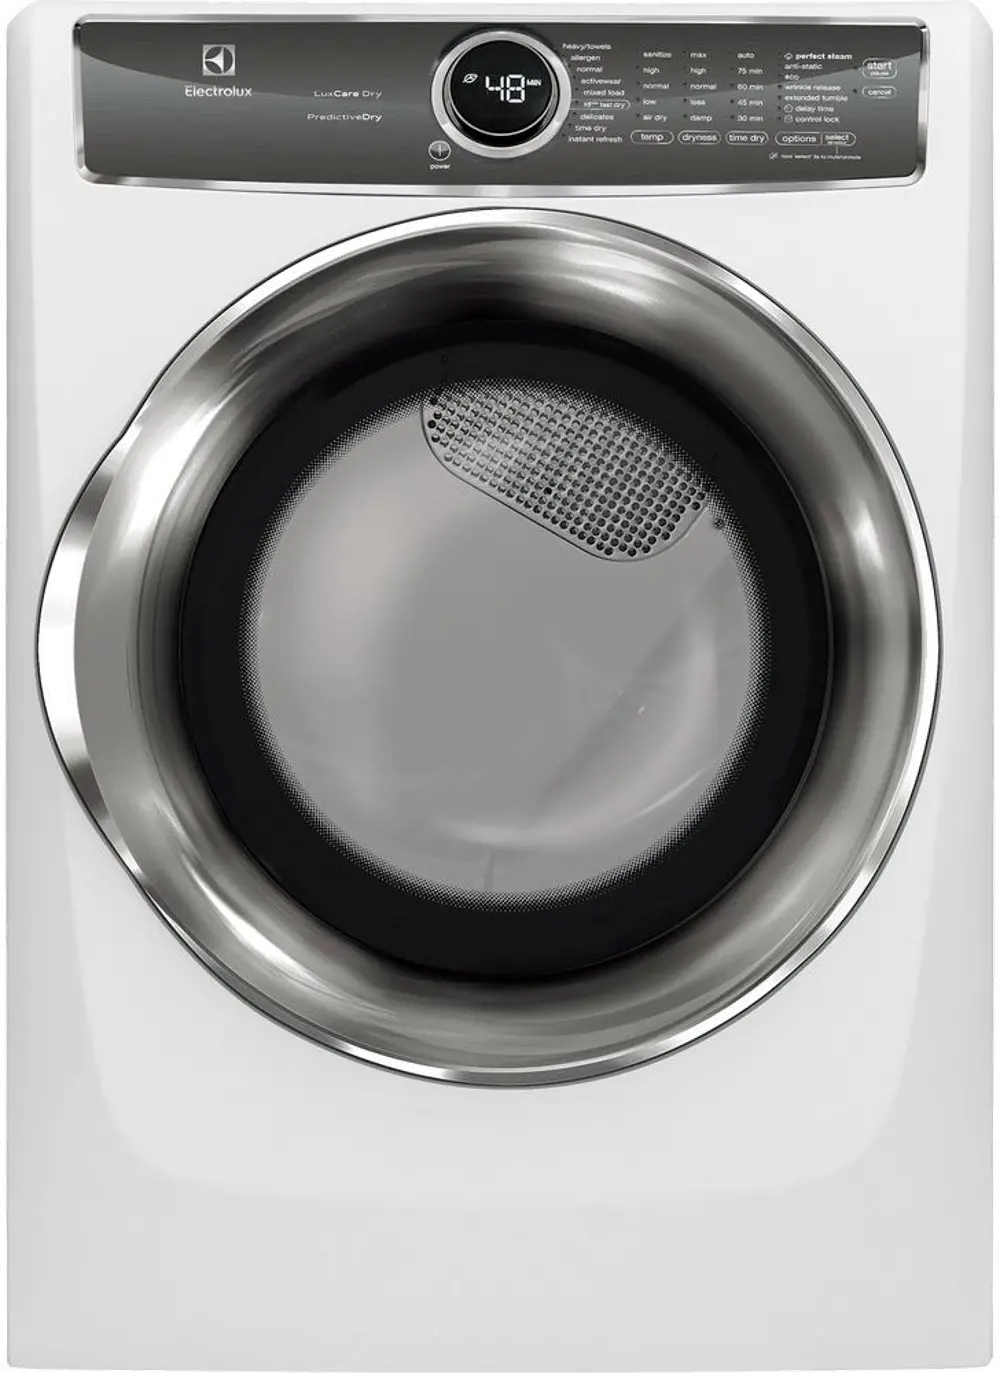 EFME627UIW Electrolux Electric Dryer with Predictive Dry - 8.0 Cu. Ft. White-1